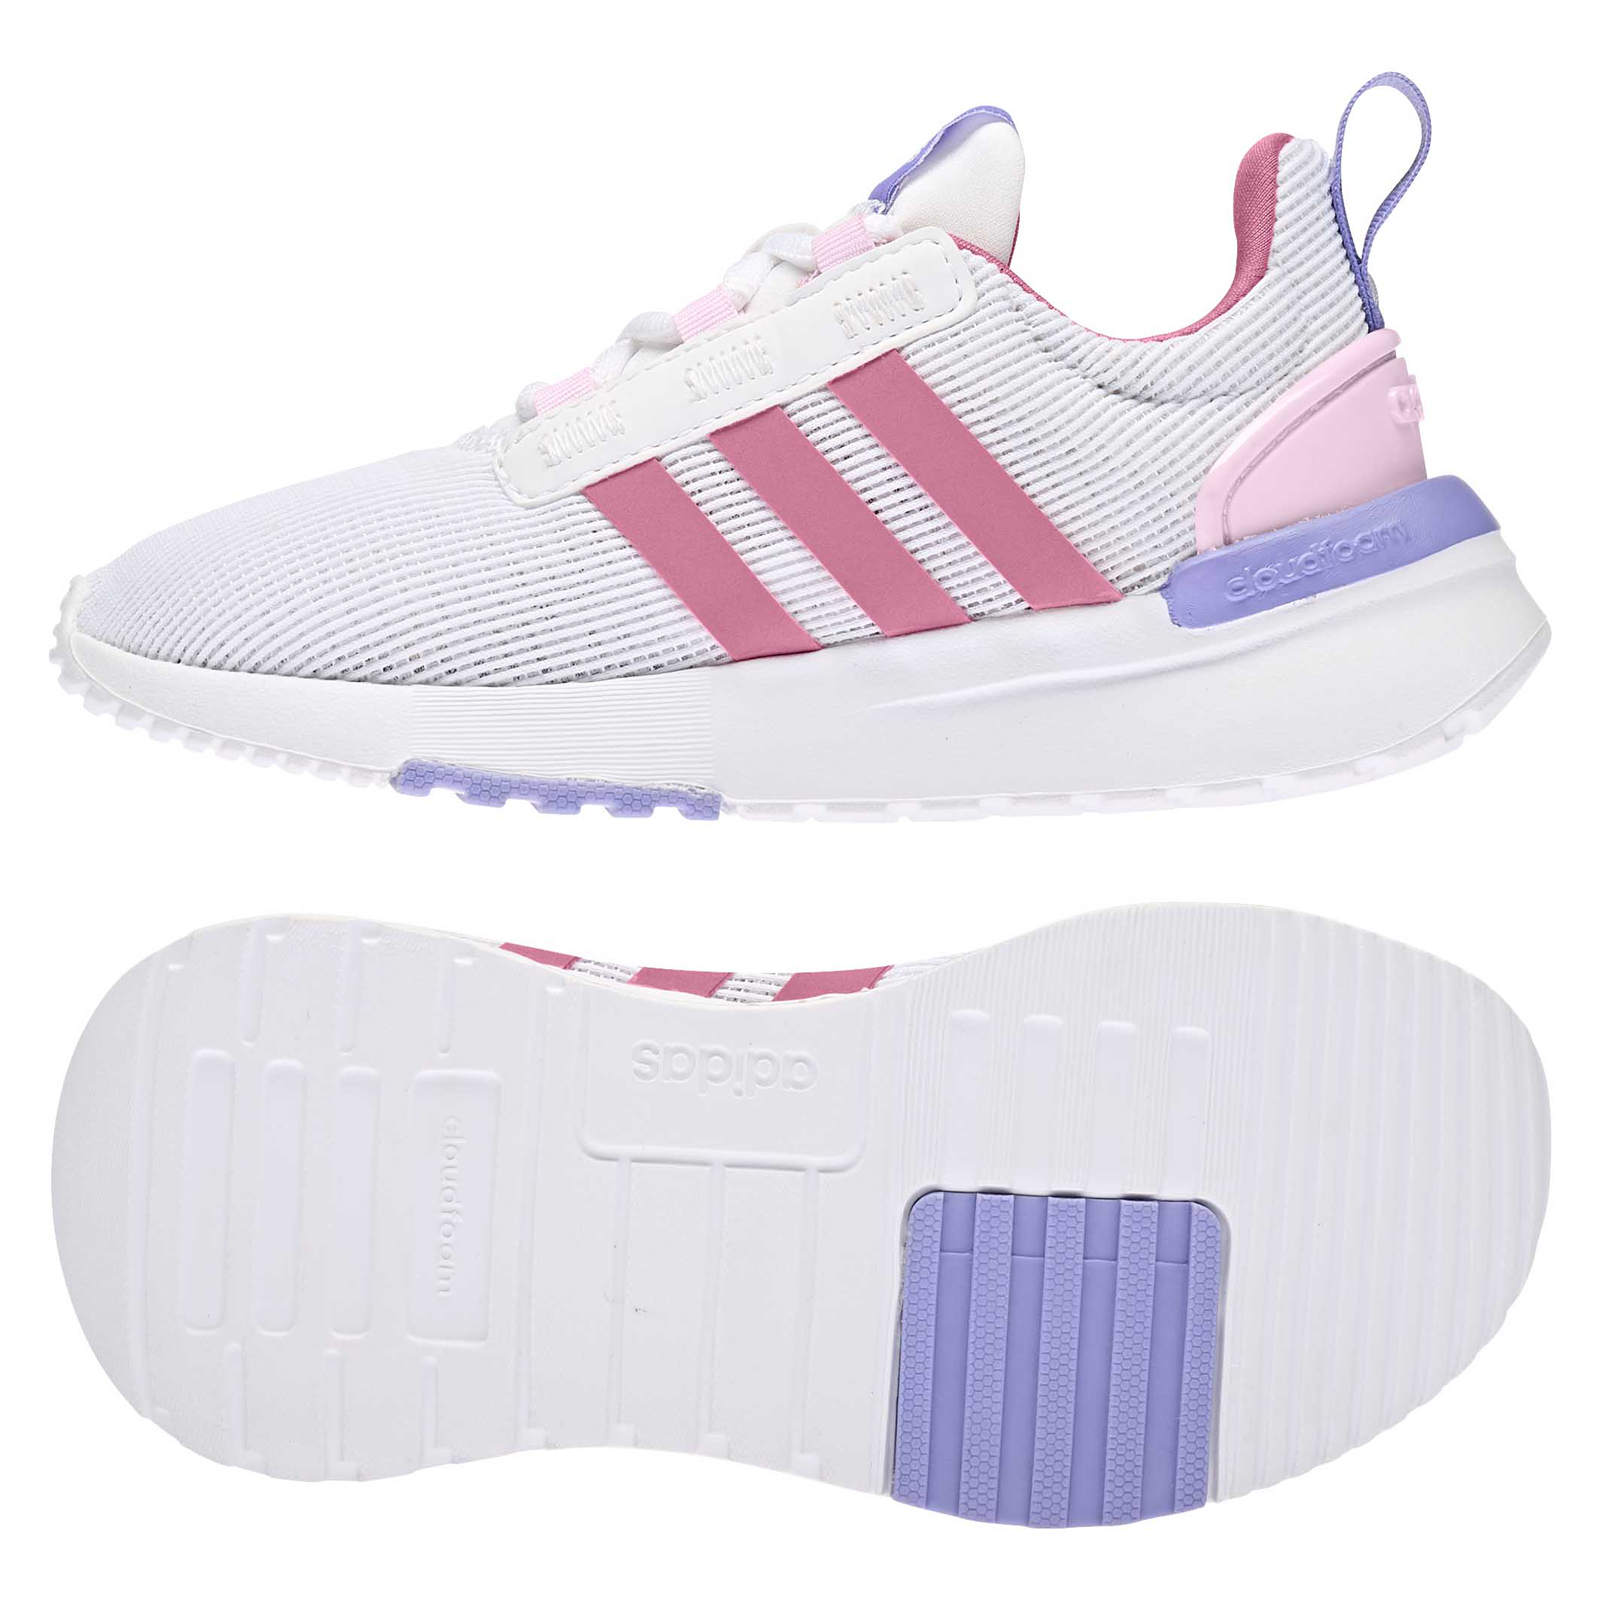 adidas Racer TR21 Kids Shoes